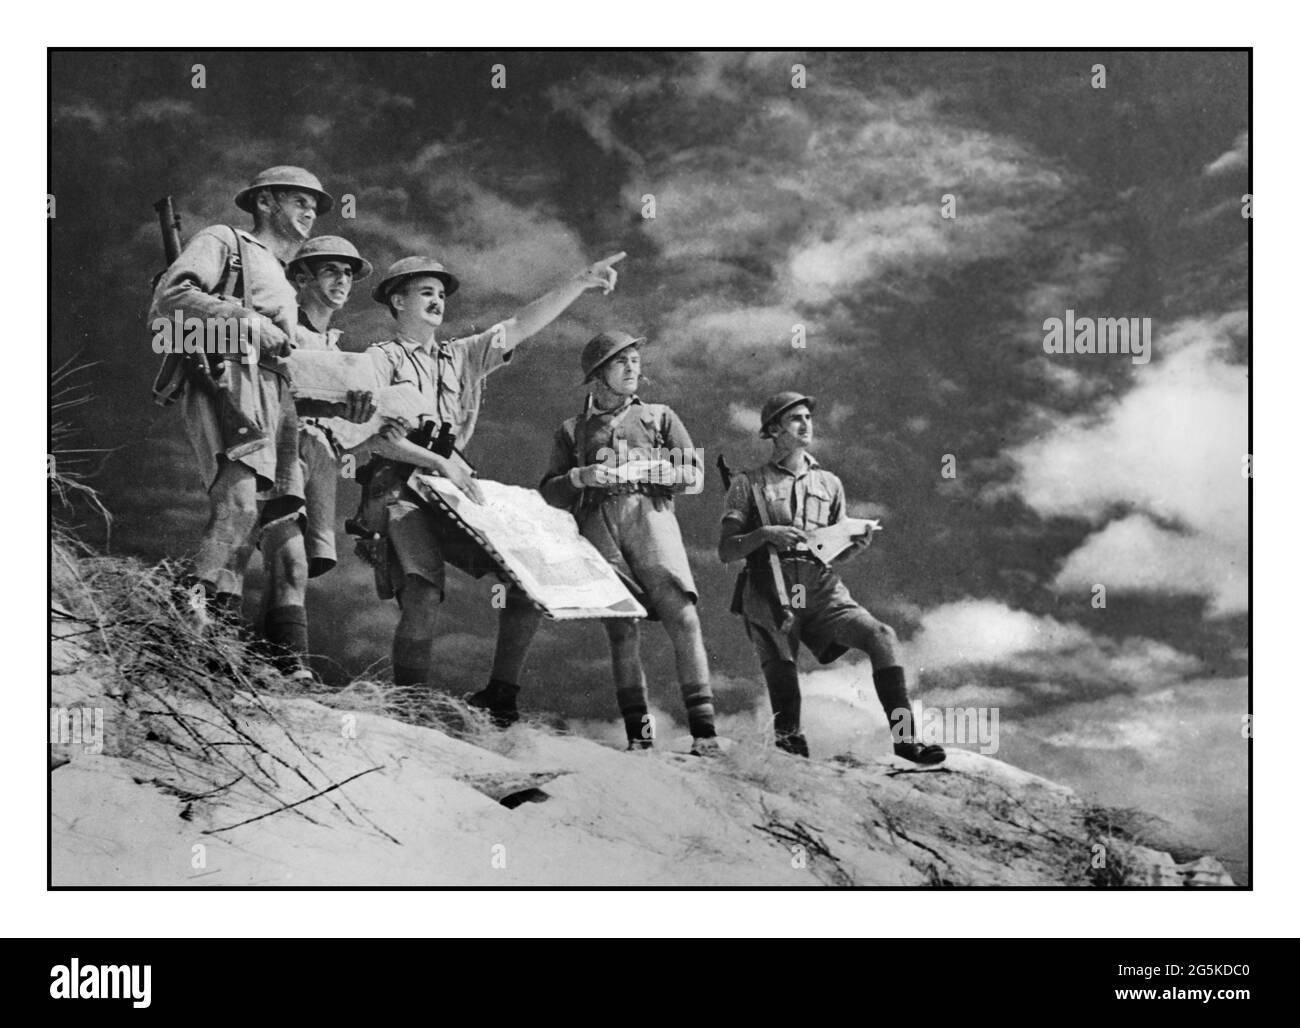 World war 2 Black and White Stock Photos & Images - Alamy